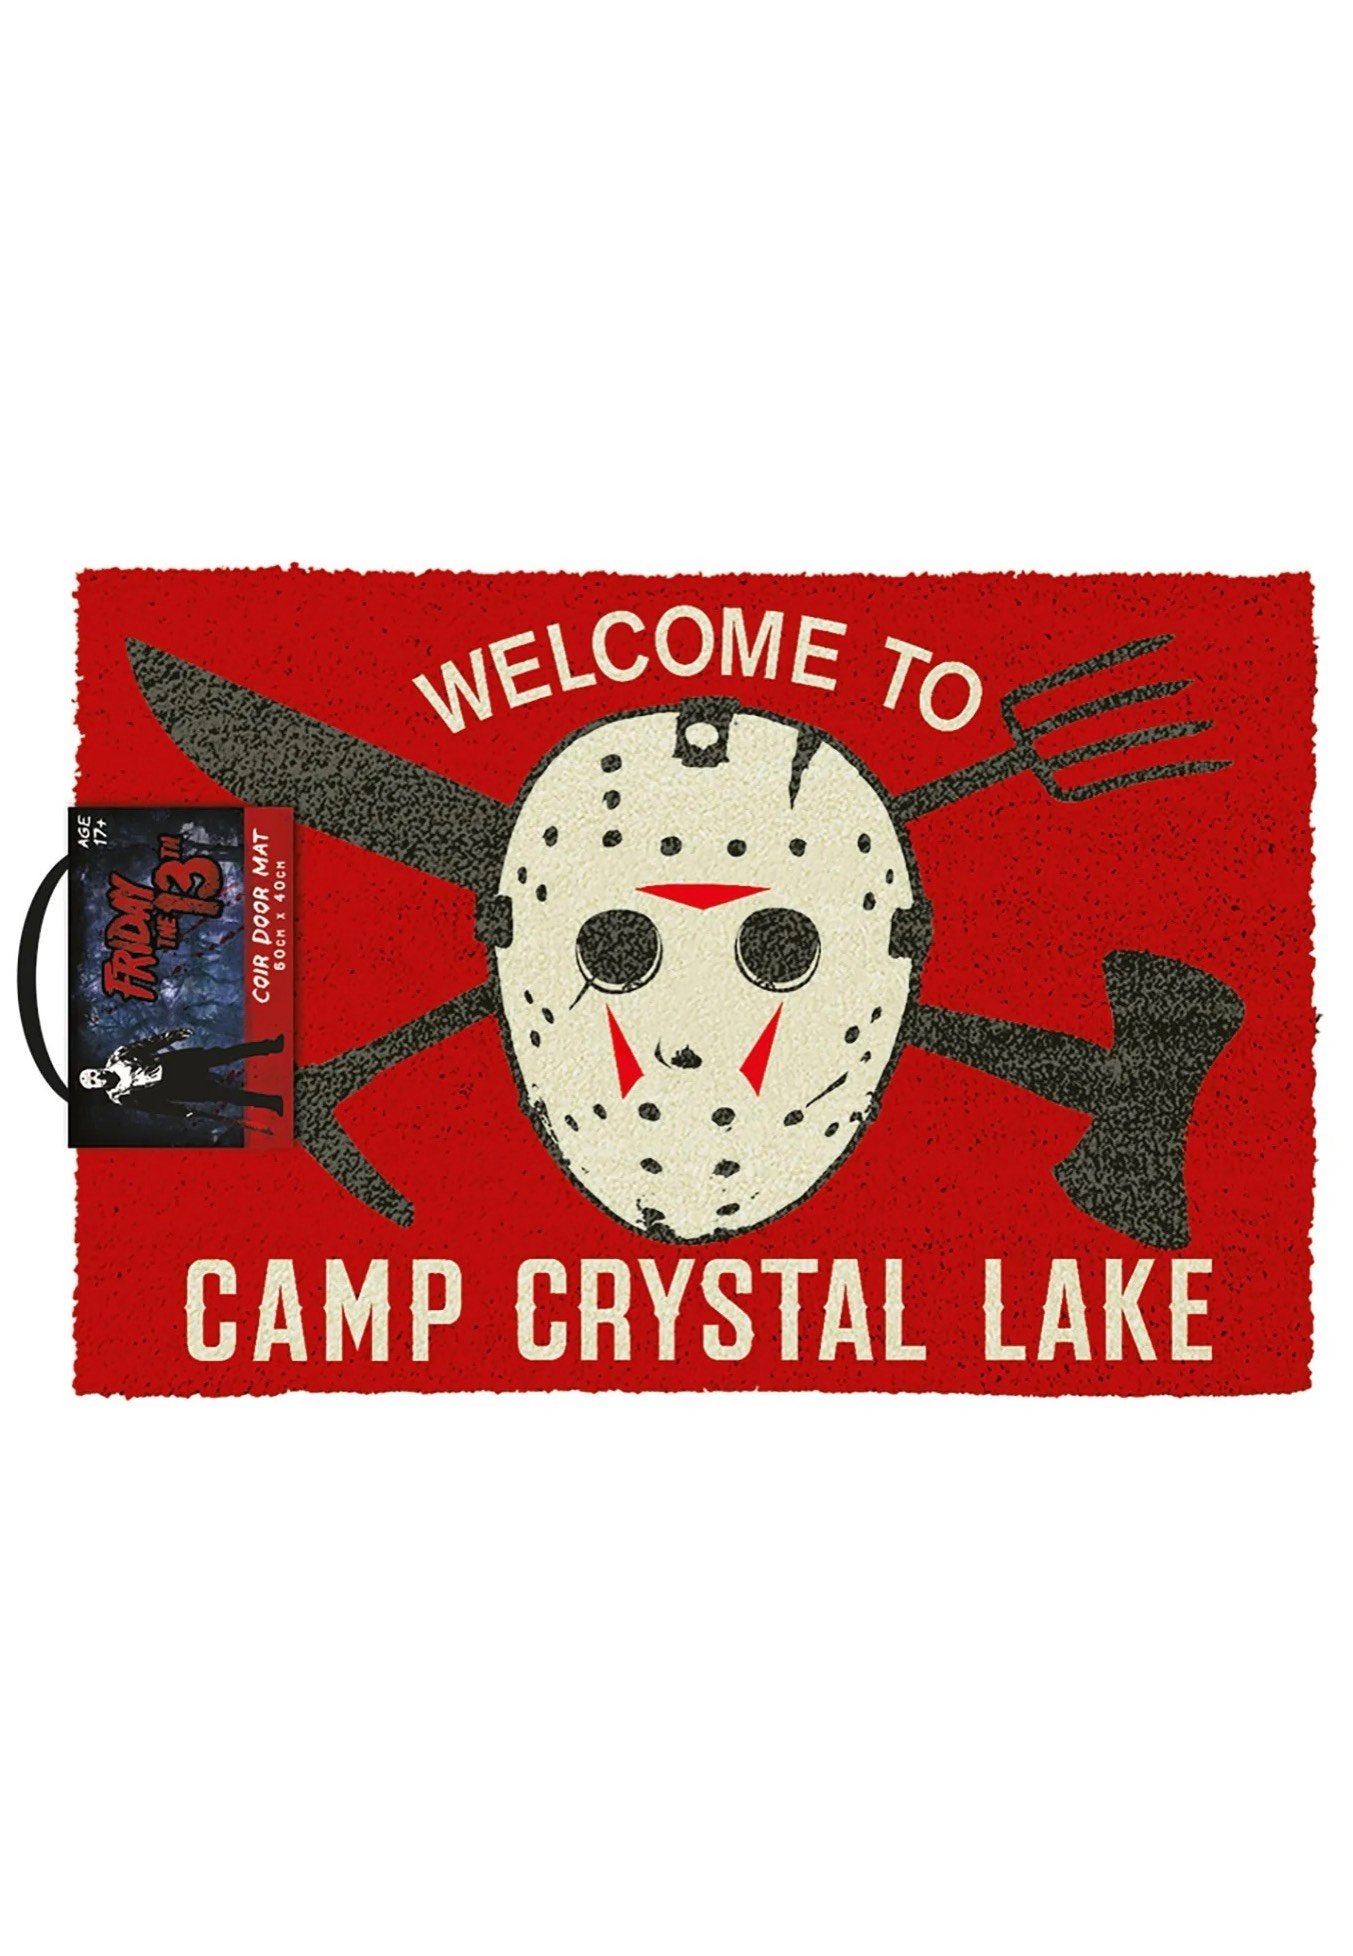 Friday The 13th - Welcome To Camp Crystal Lake - Doormat